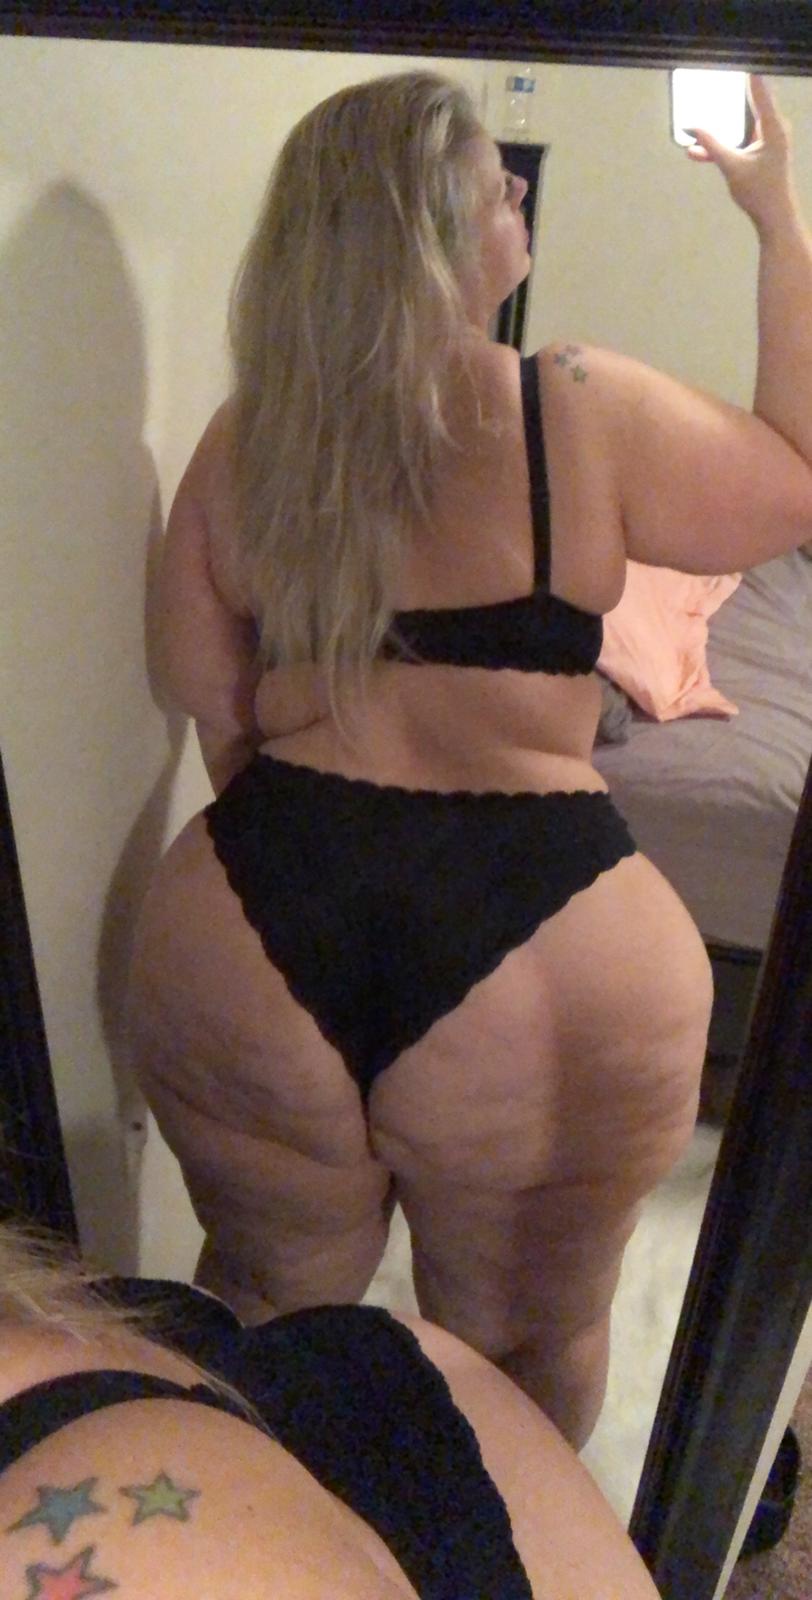 Pawg ass massive Pawg Porn